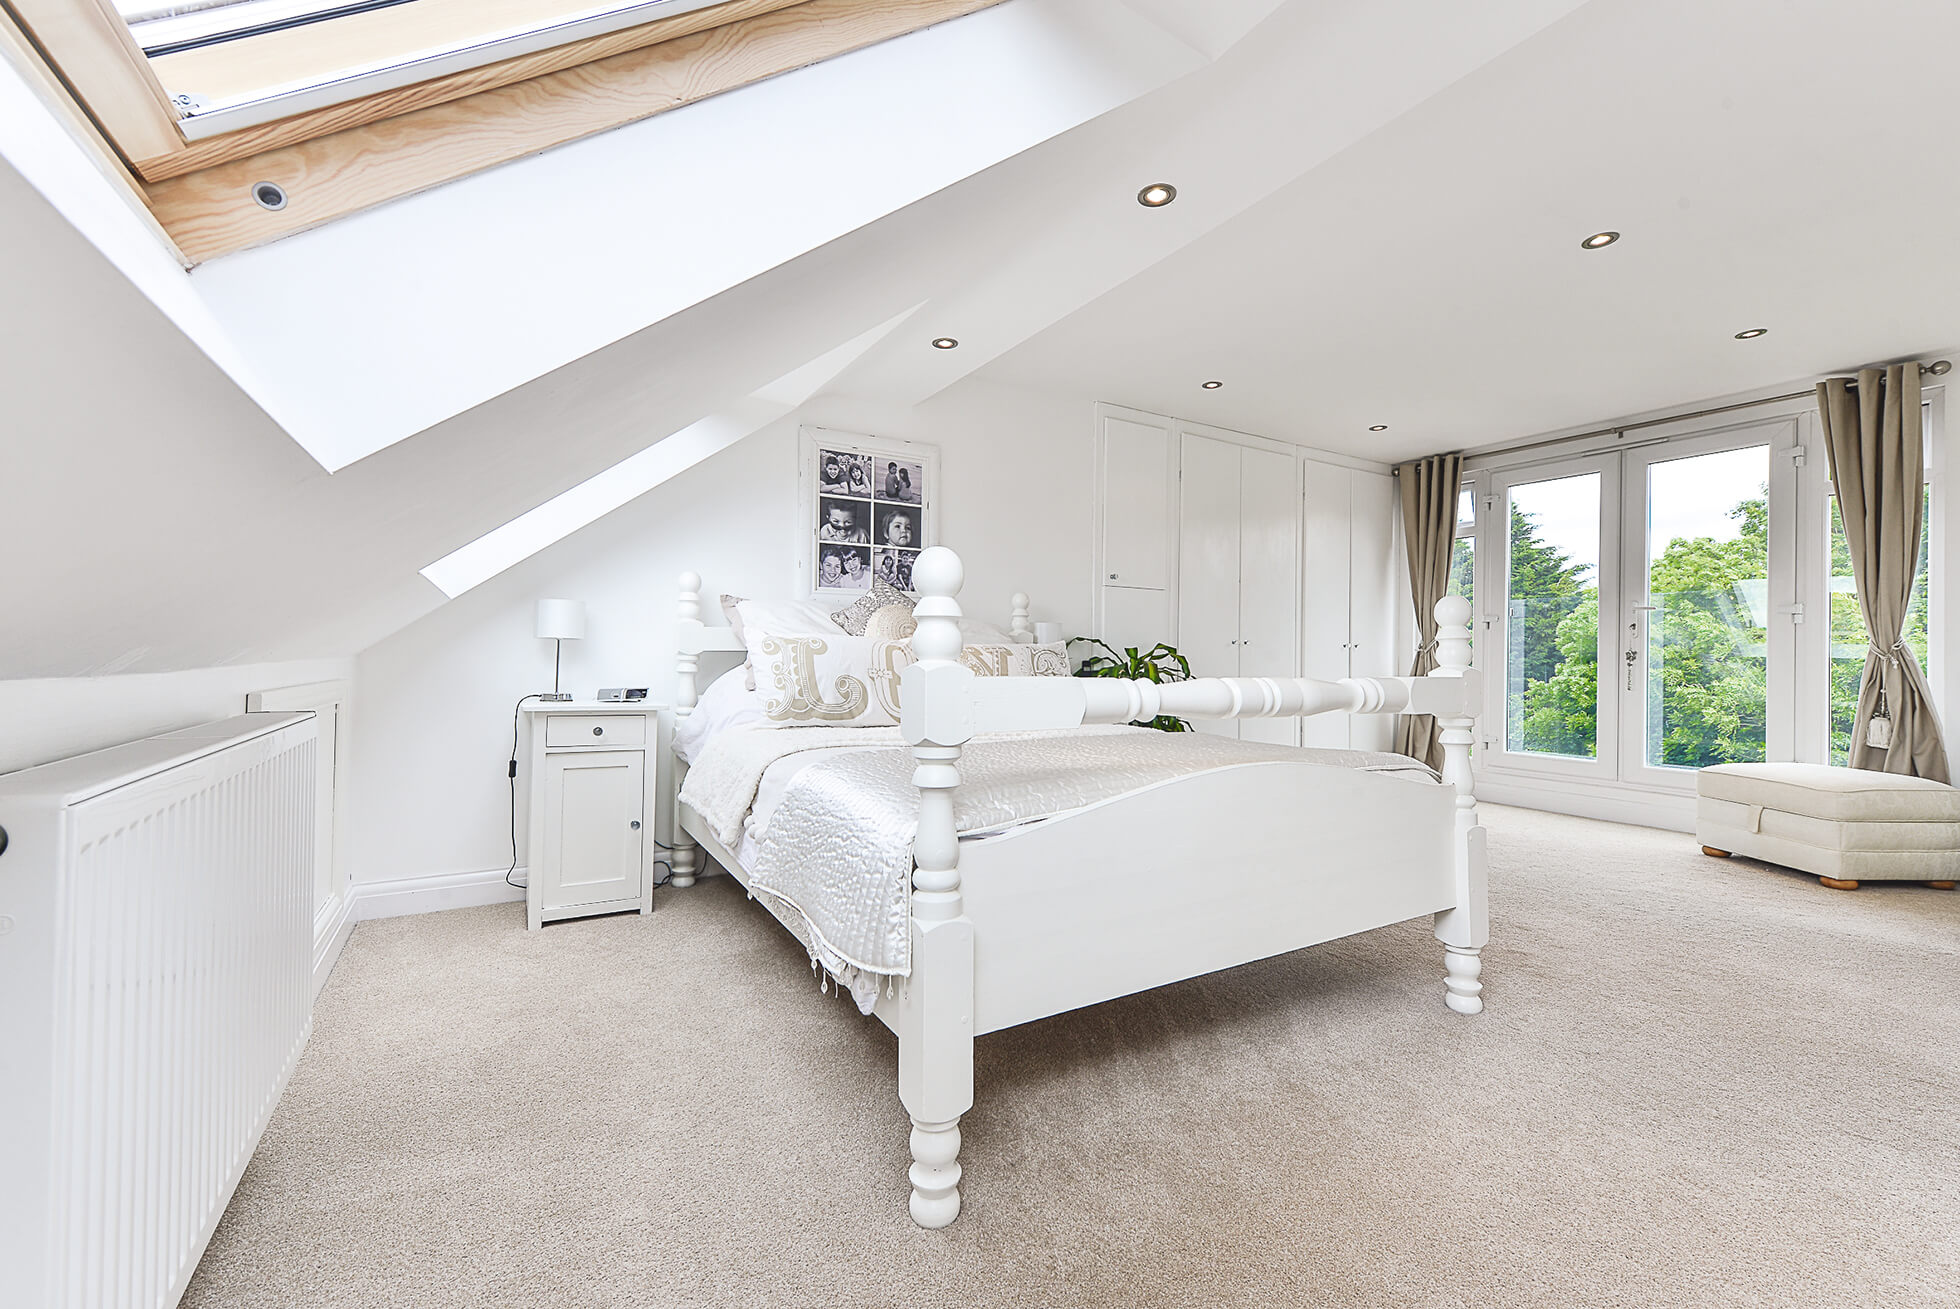 Do you have a question about converting your Loft in Gubblecote? Here are the most popular questions asked by our clients.